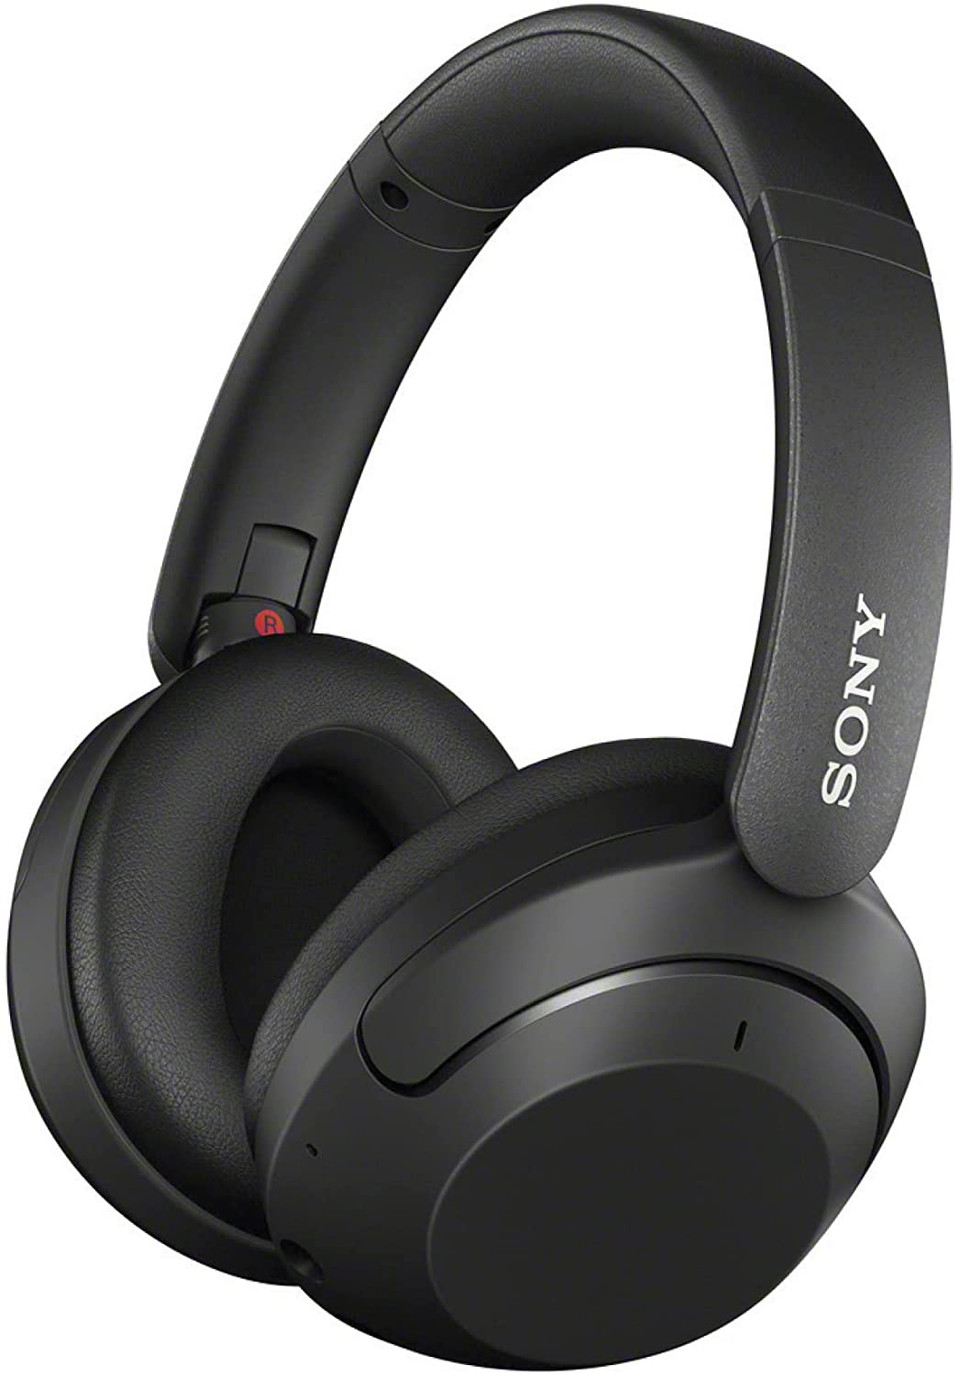 Sony WF-1000XM5 Noise Canceling Truly Wireless Earbuds (2 Colors, Refurb) $120 & More + Free Shipping